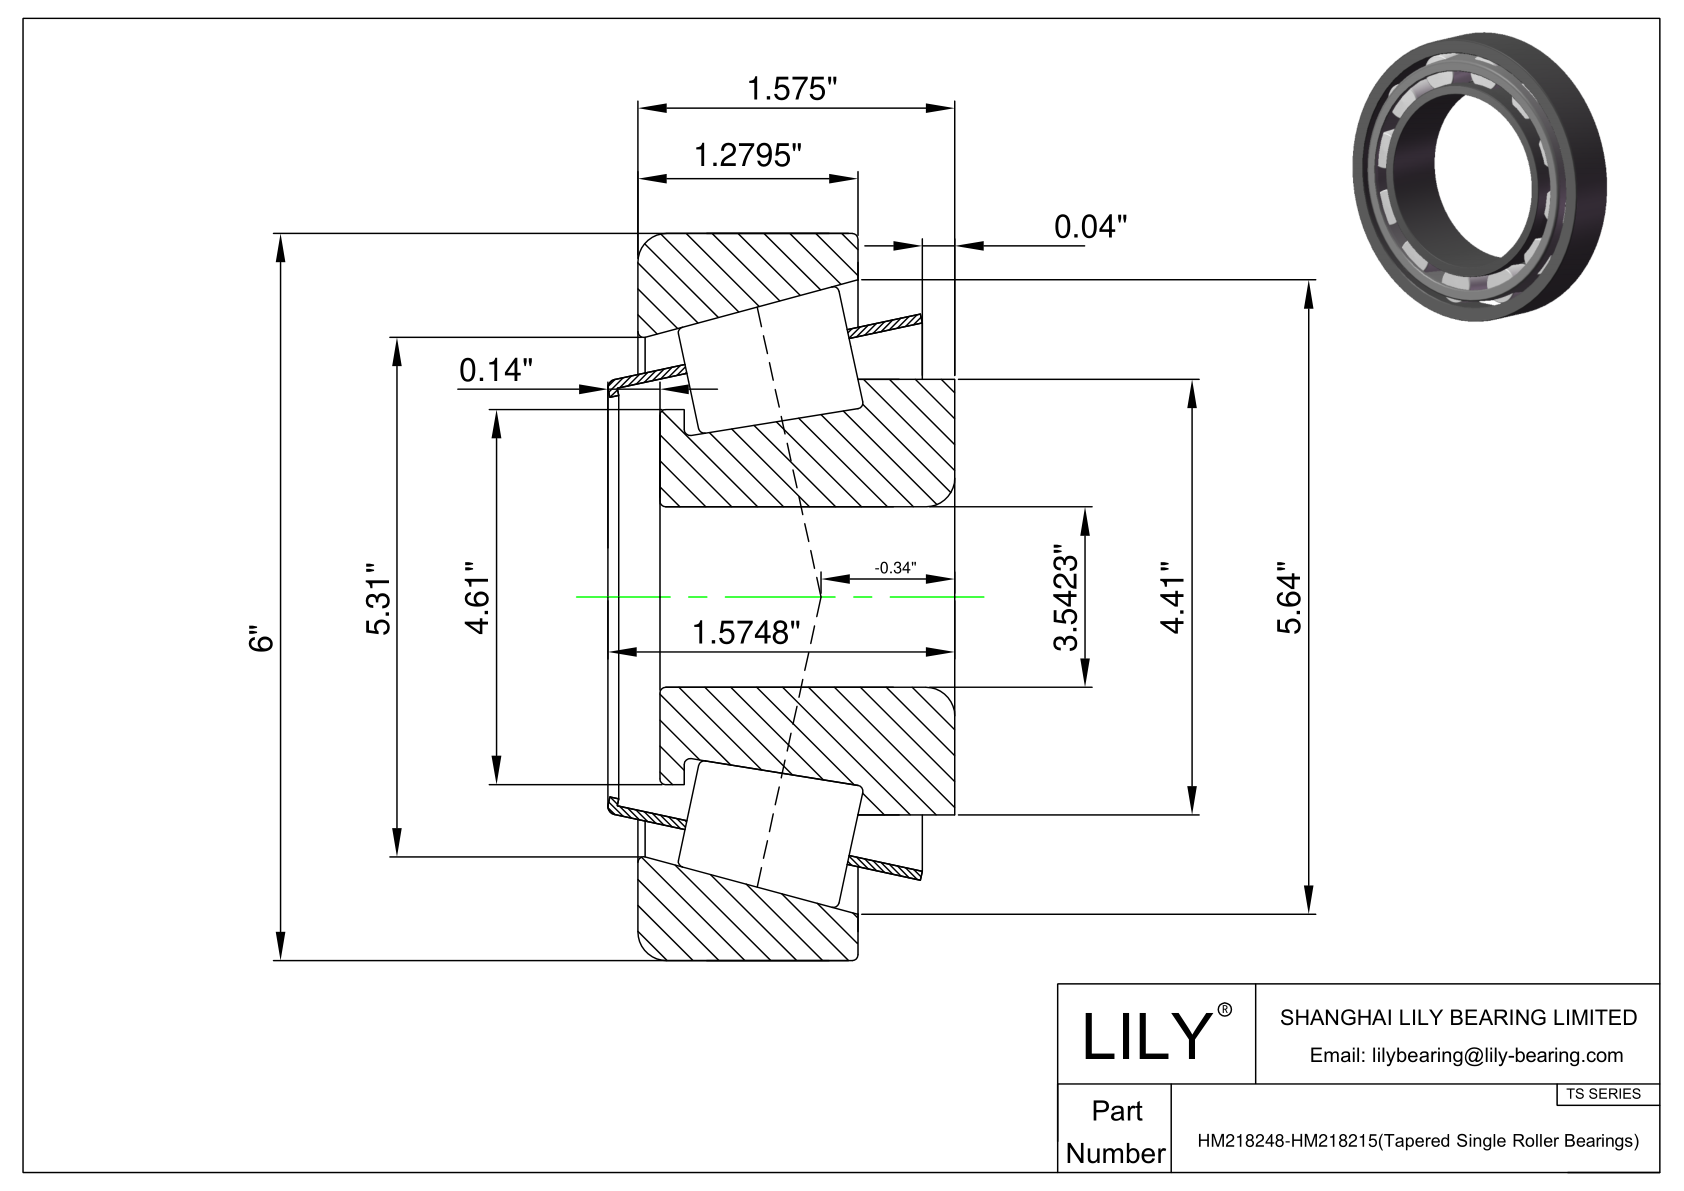 HM218248-HM218215 TS (Tapered Single Roller Bearings) (Imperial) cad drawing